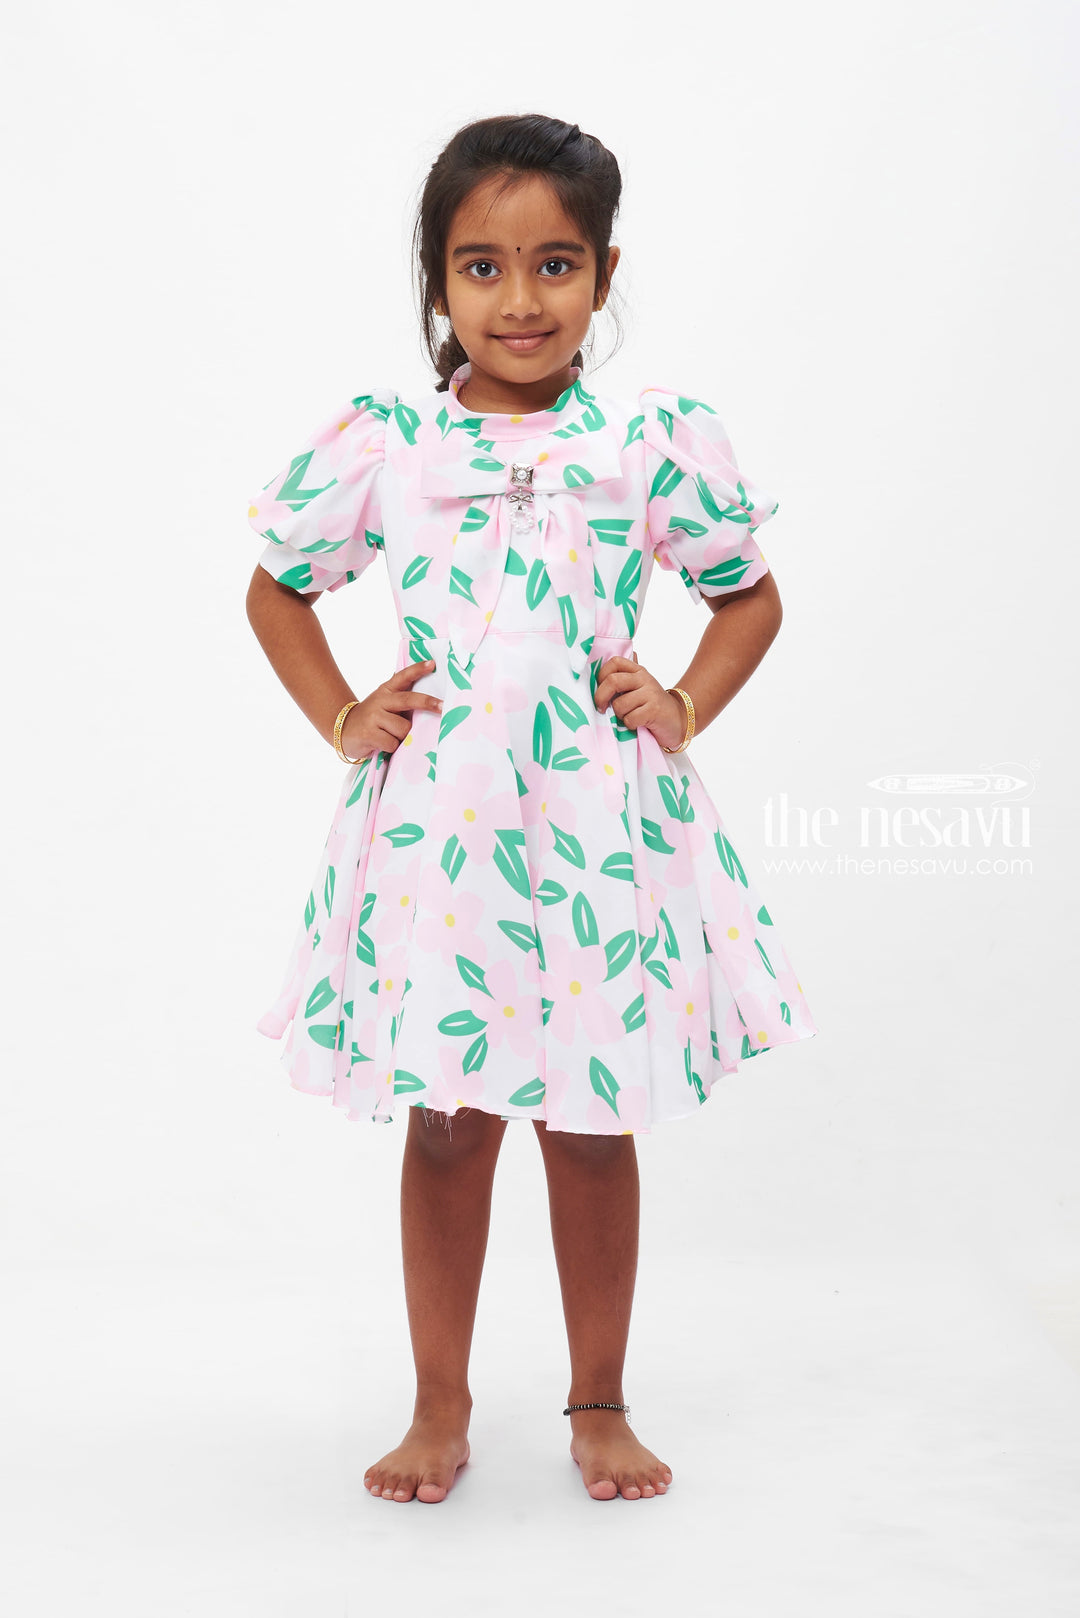 The Nesavu Girls Fancy Frock Pink Petal Perfection Frock with Floral Accents for Girls Nesavu 16 (1Y) / Pink GFC1186B-16 Girls Floral Print Frock | Pink Petal Perfection with Jewel Accent | The Nesavu